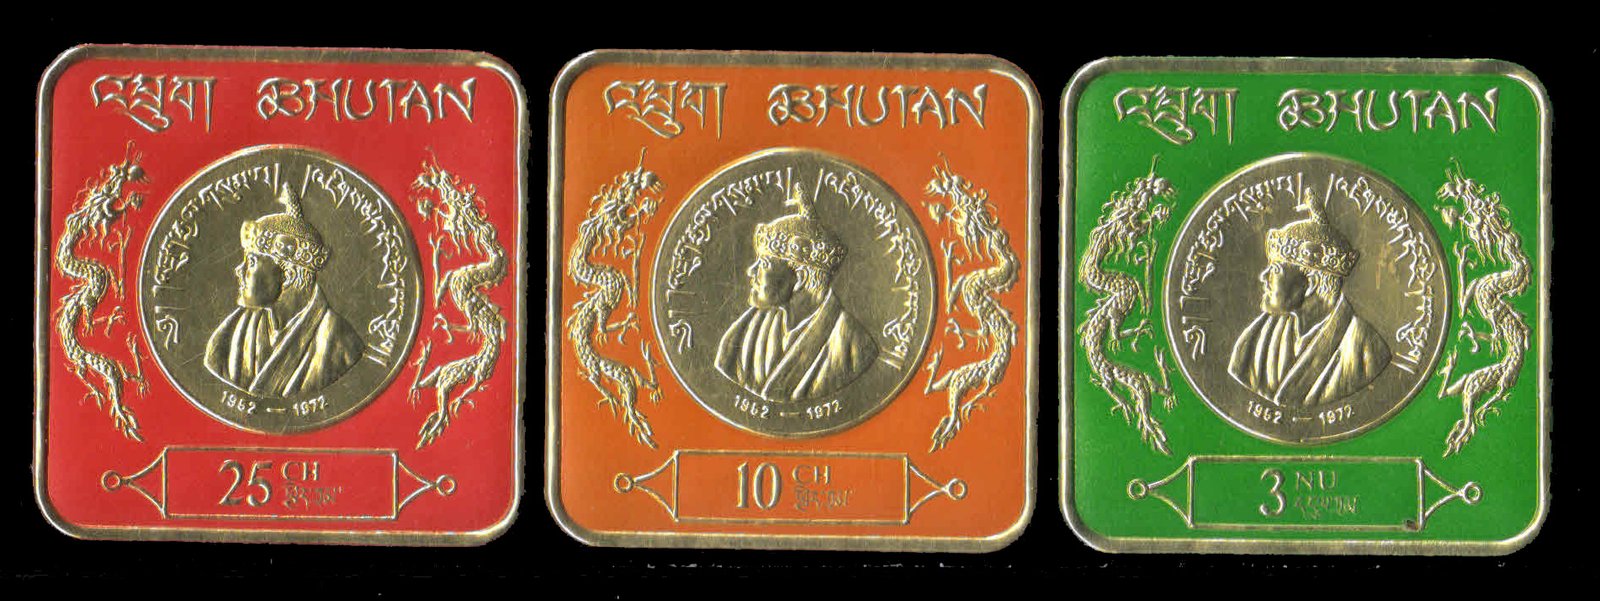 BHUTAN 1976 - King Jigme, Gold Foil Square Stamps, Set of 3, Mint Never Hinged, Good Condition